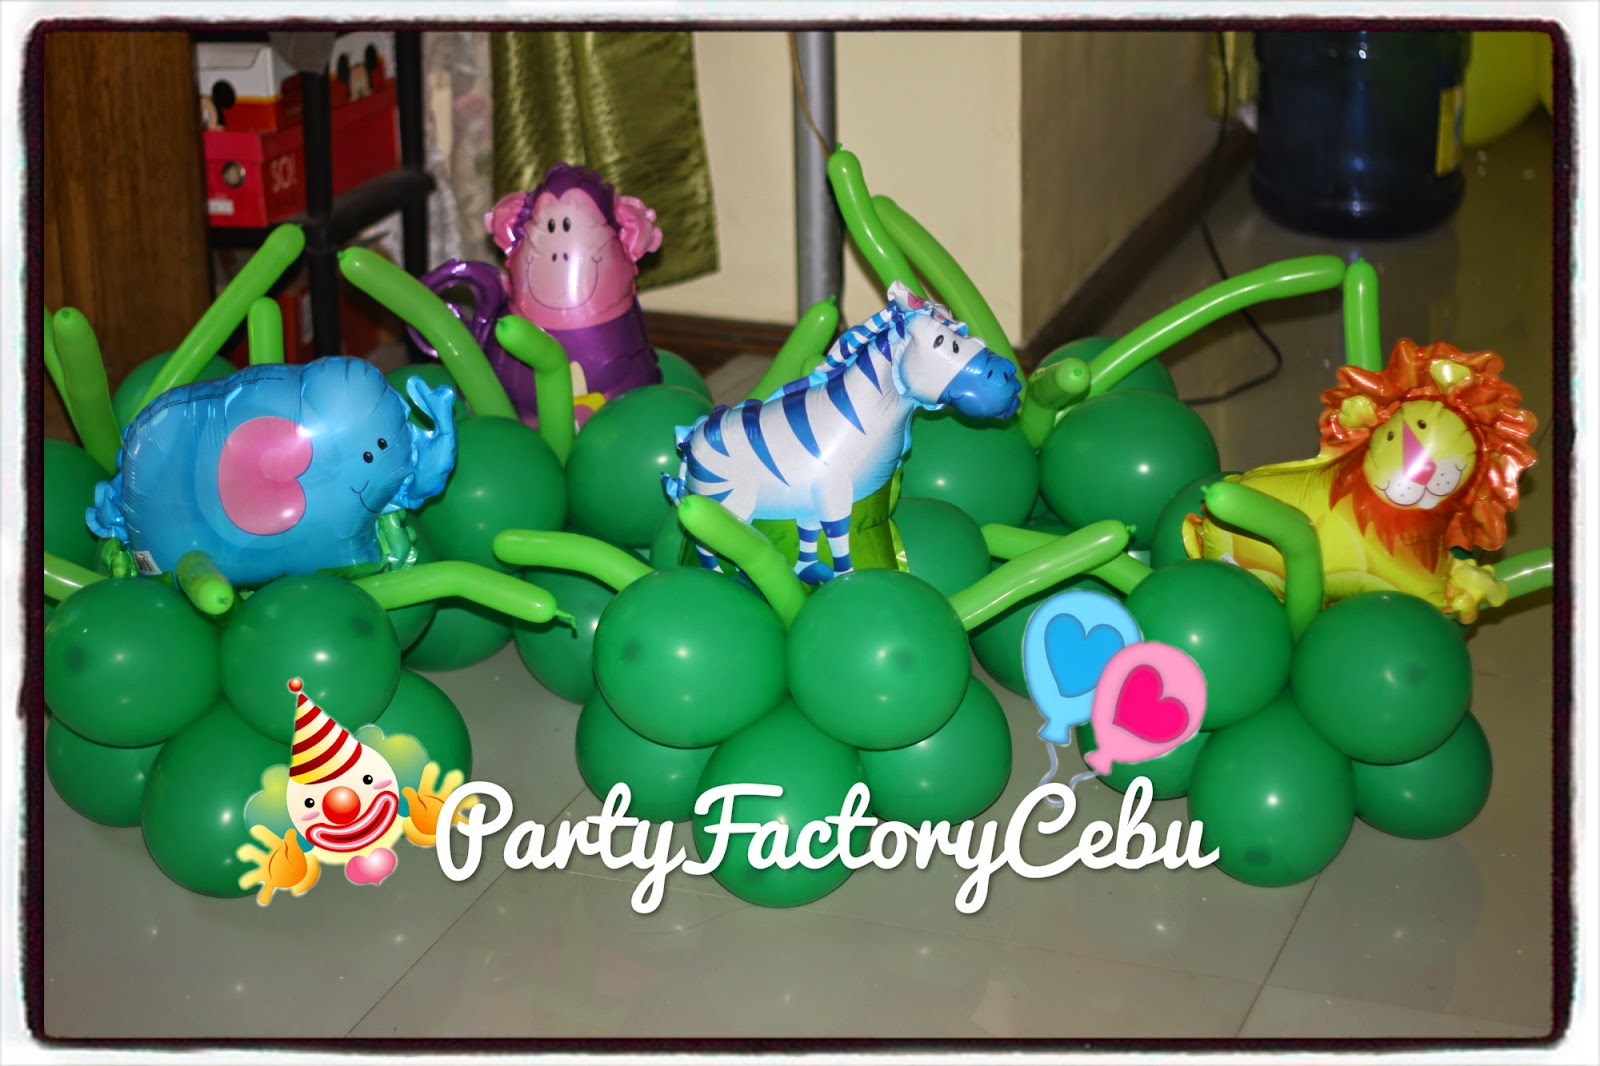 Welcome to PartyFactory Cebu: August 2014